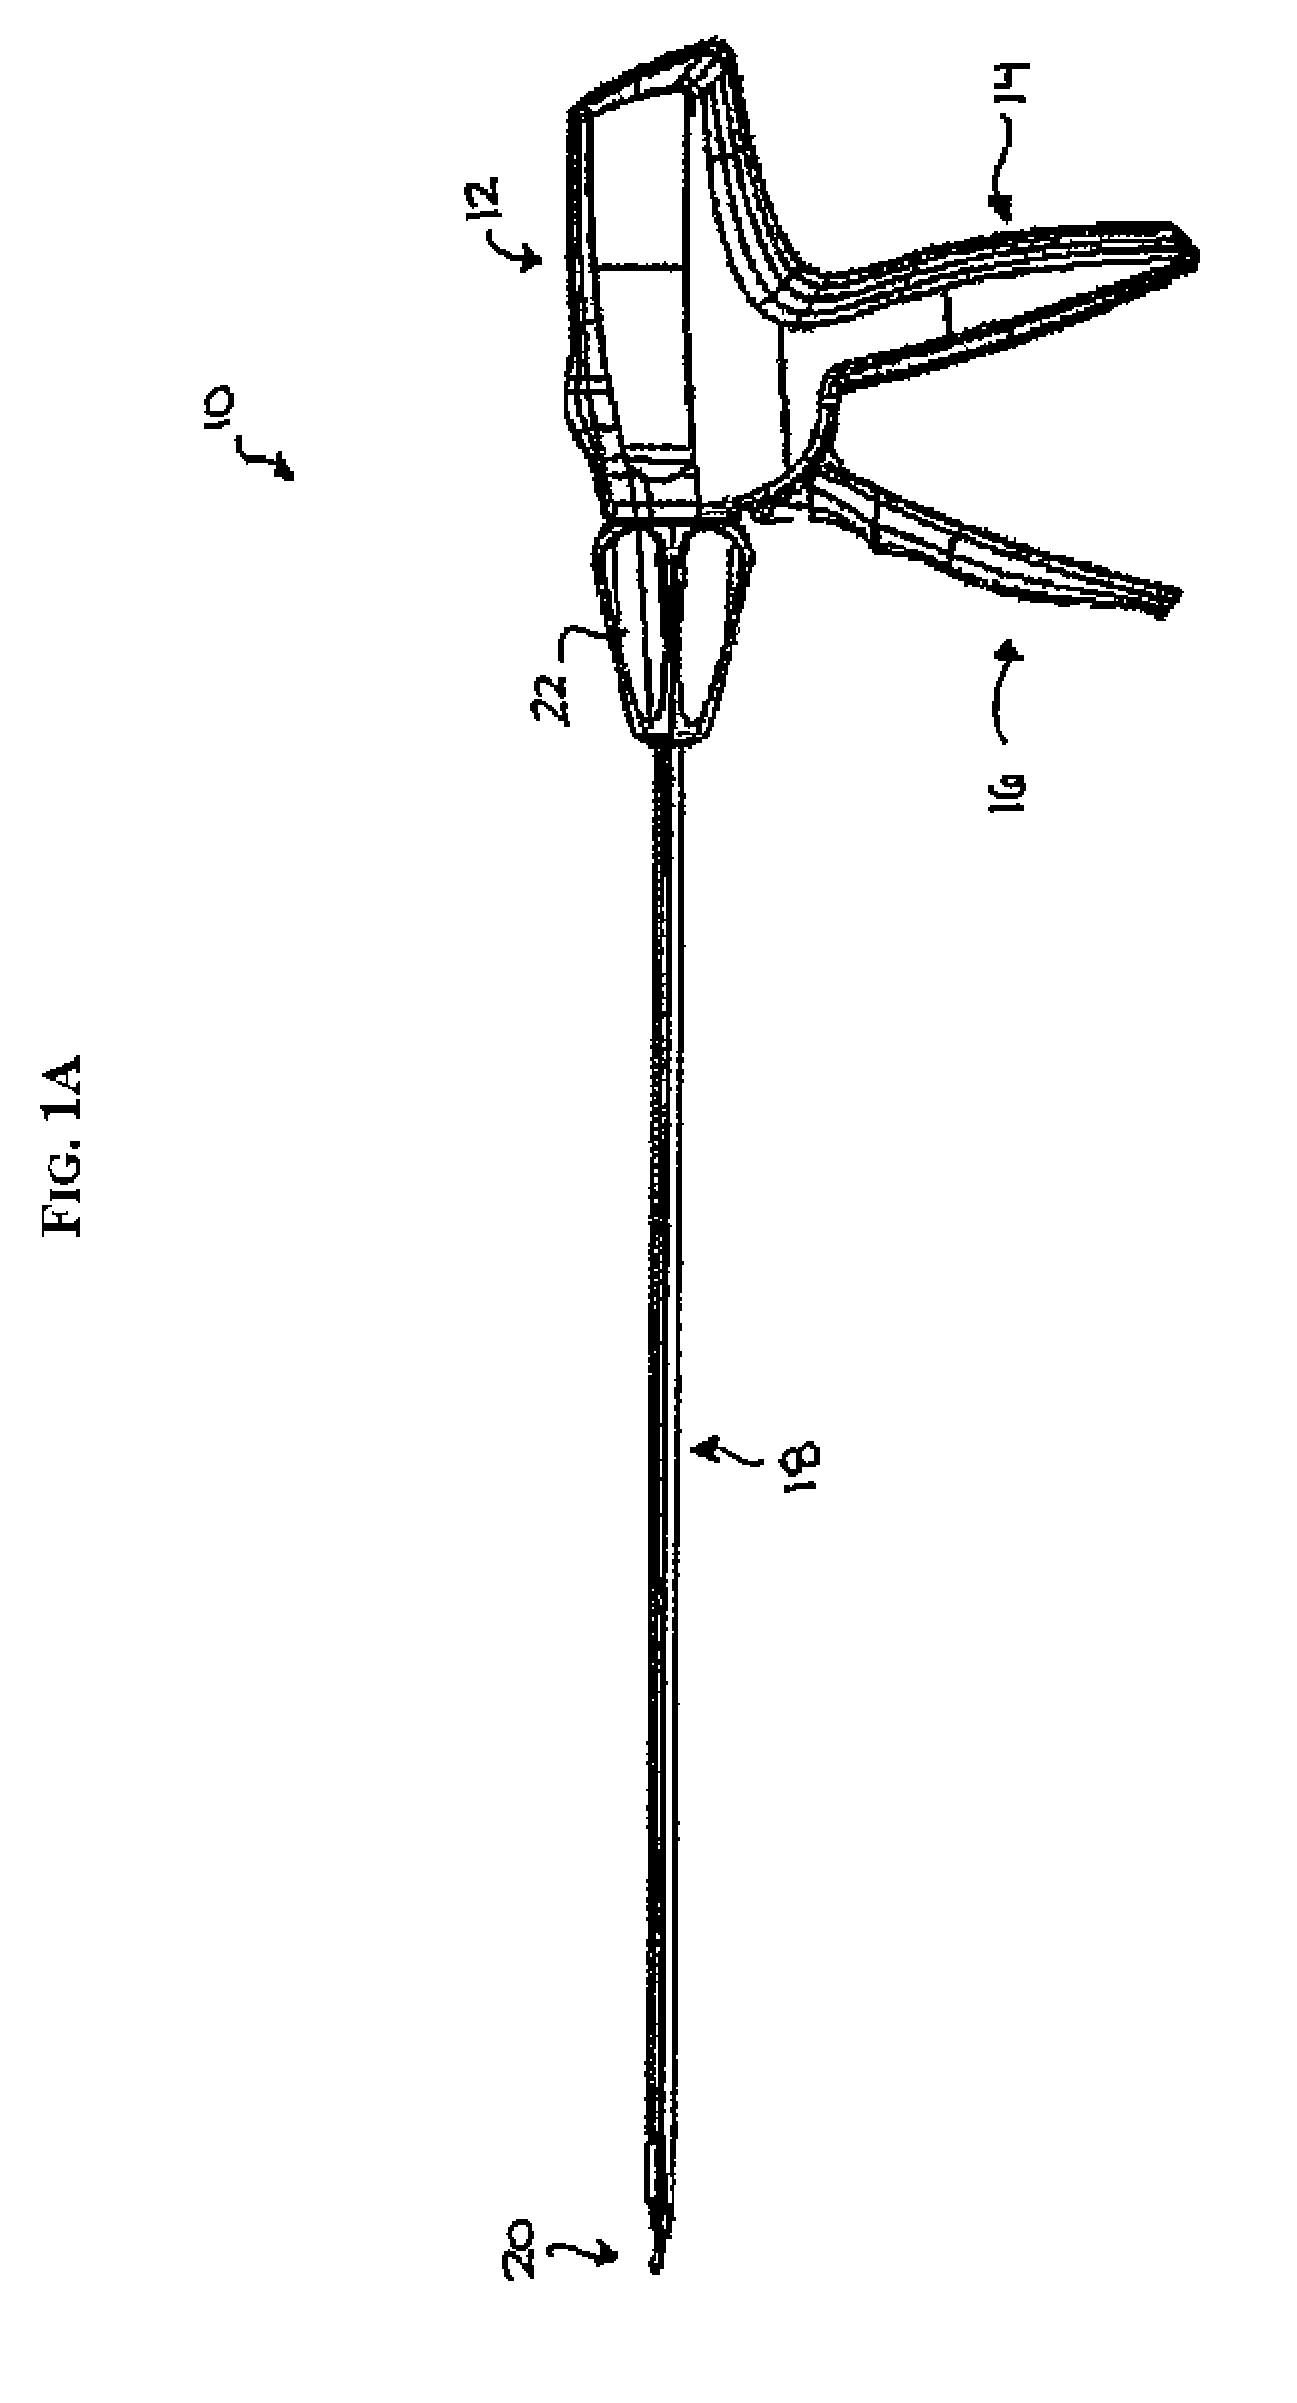 Clip advancer mechanism with alignment features